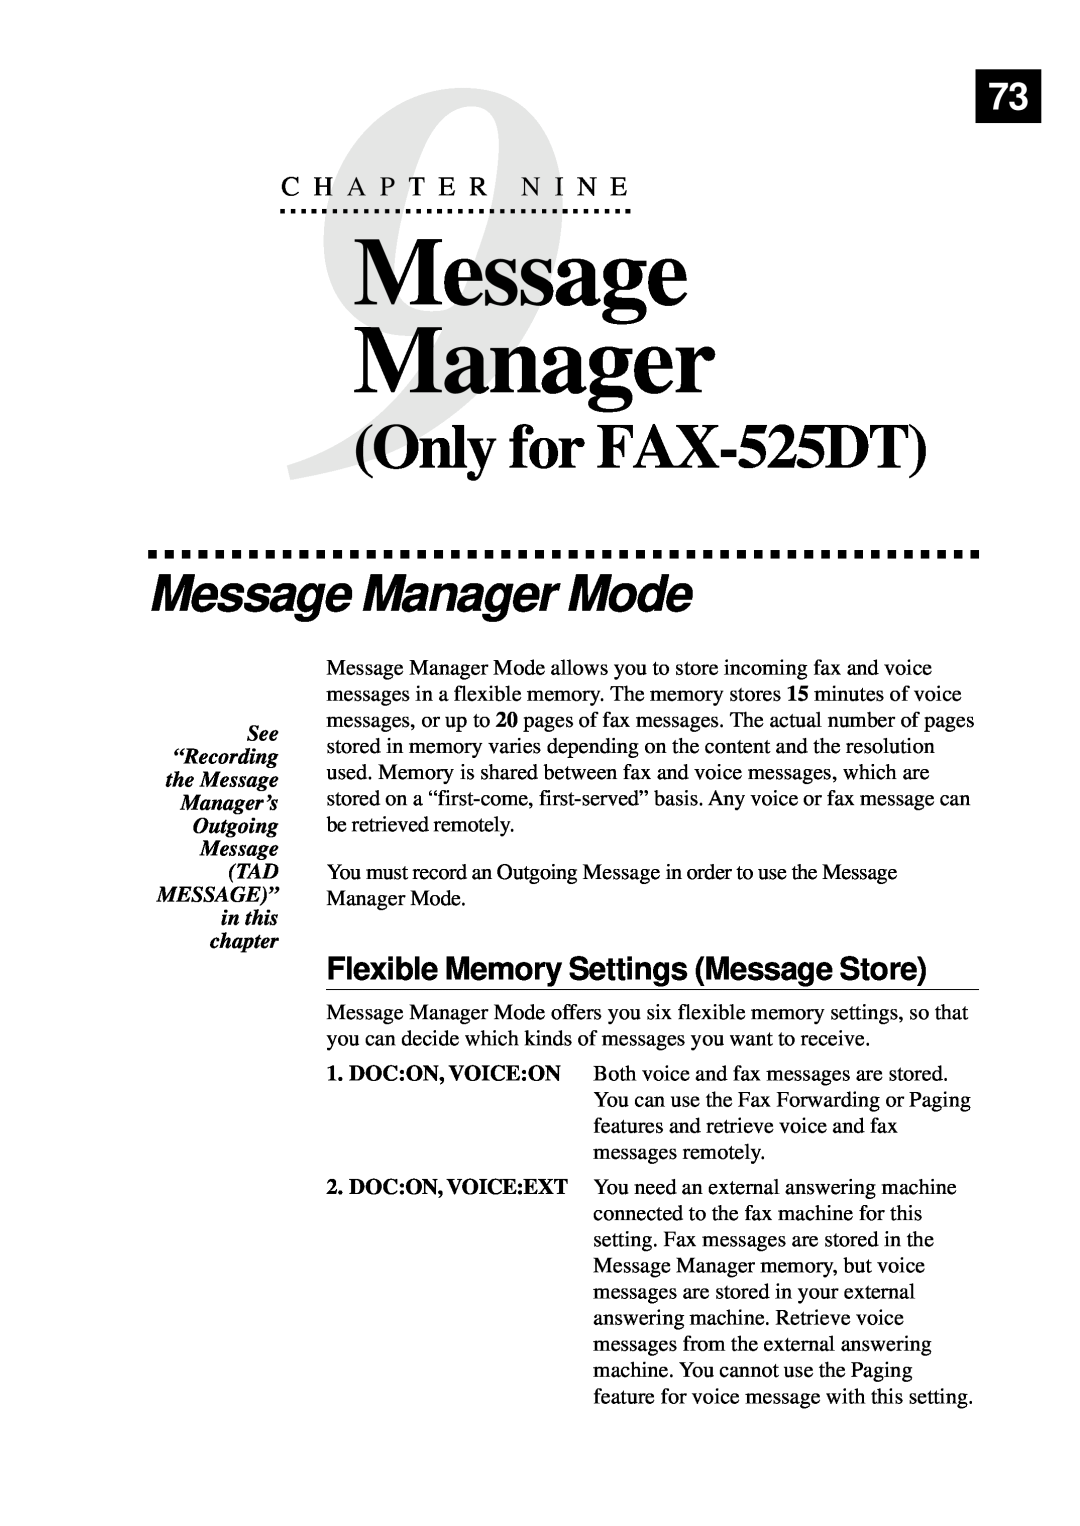 Brother 515 manual Message Manager Mode, Flexible Memory Settings Message Store, C H A P T E R N I N E 